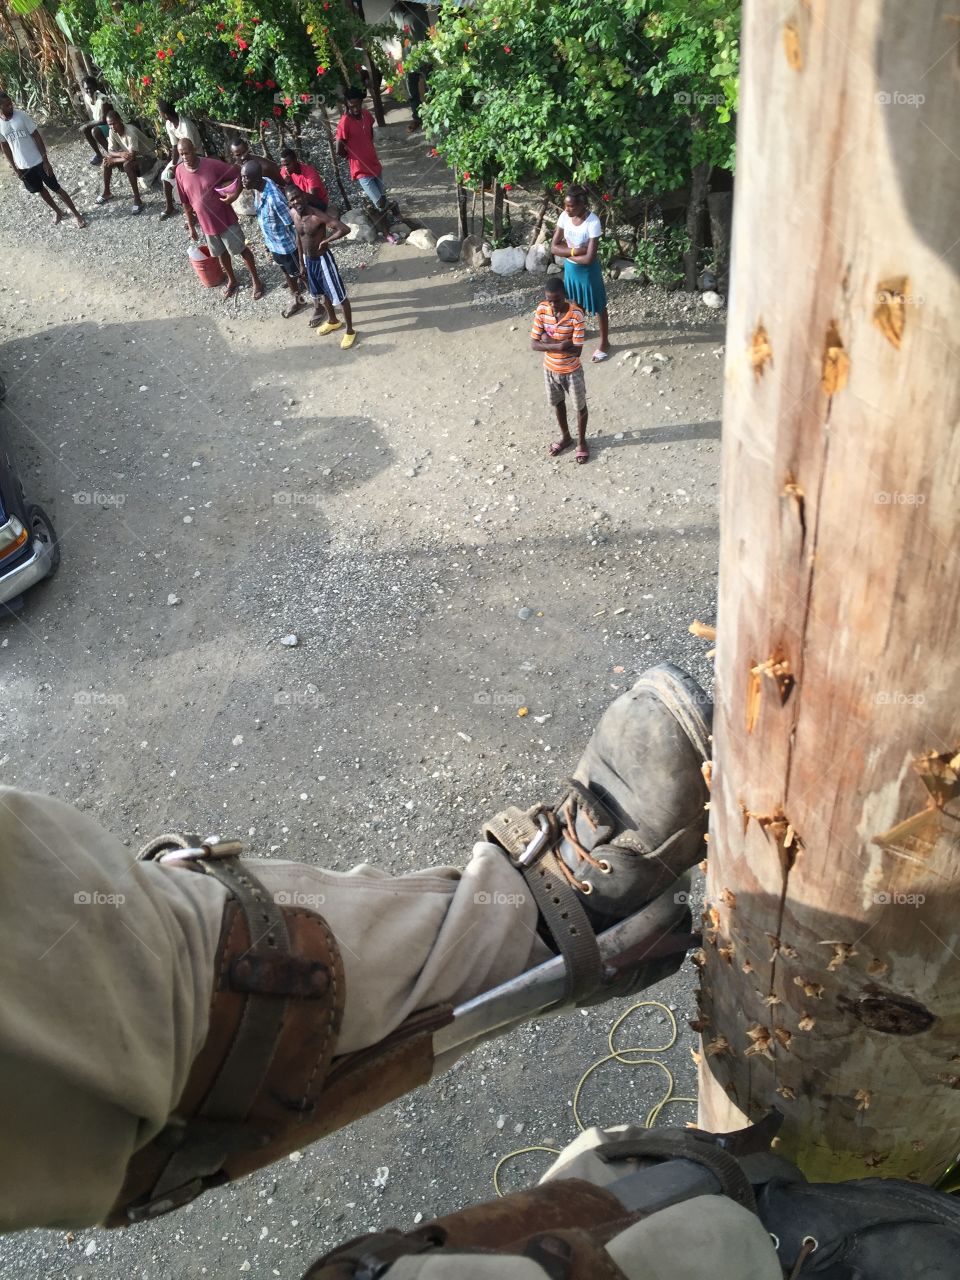 This photo was taking from a power pole in Haiti while I was building power lines to help the local people. 